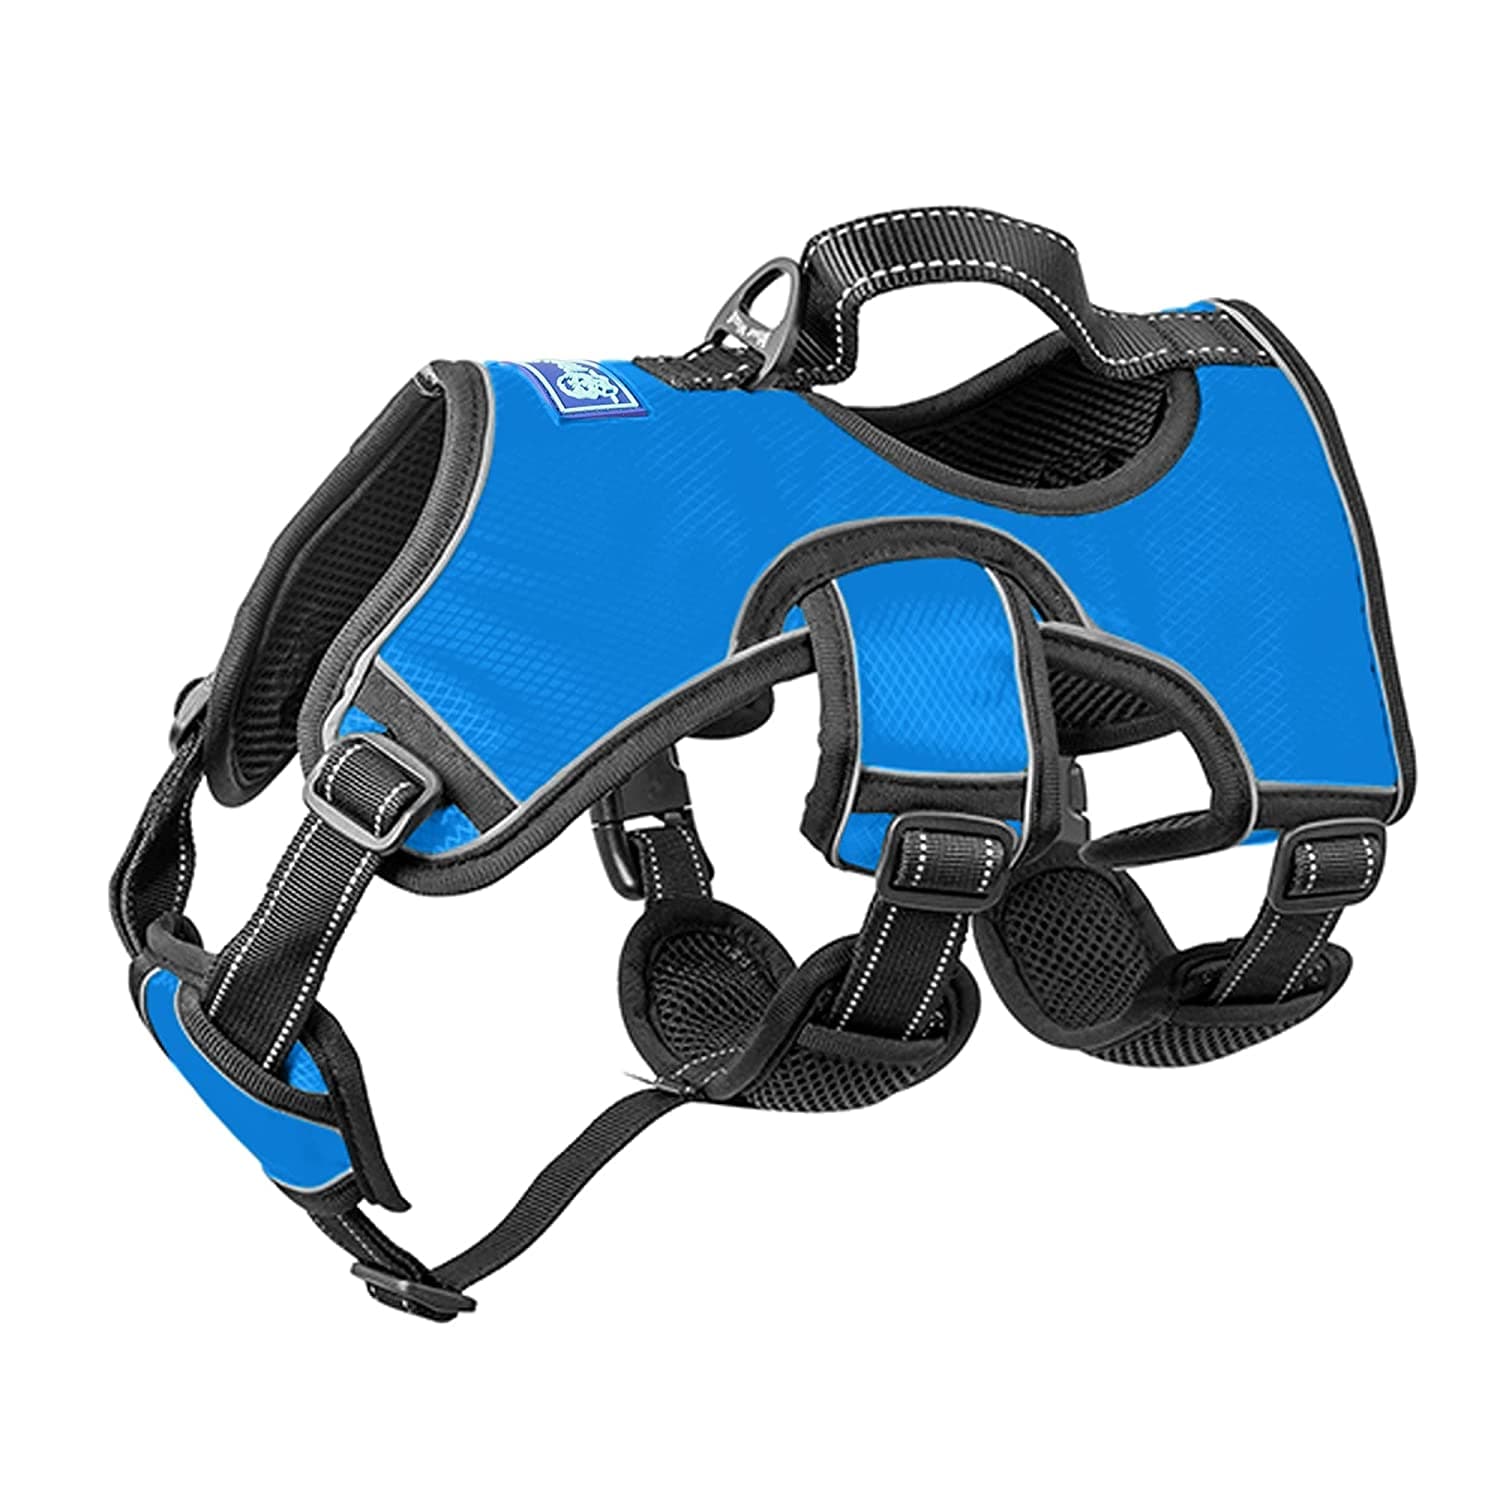 Whoof Whoof Full Body Three Layer Belt Harness for Dogs (Blue)